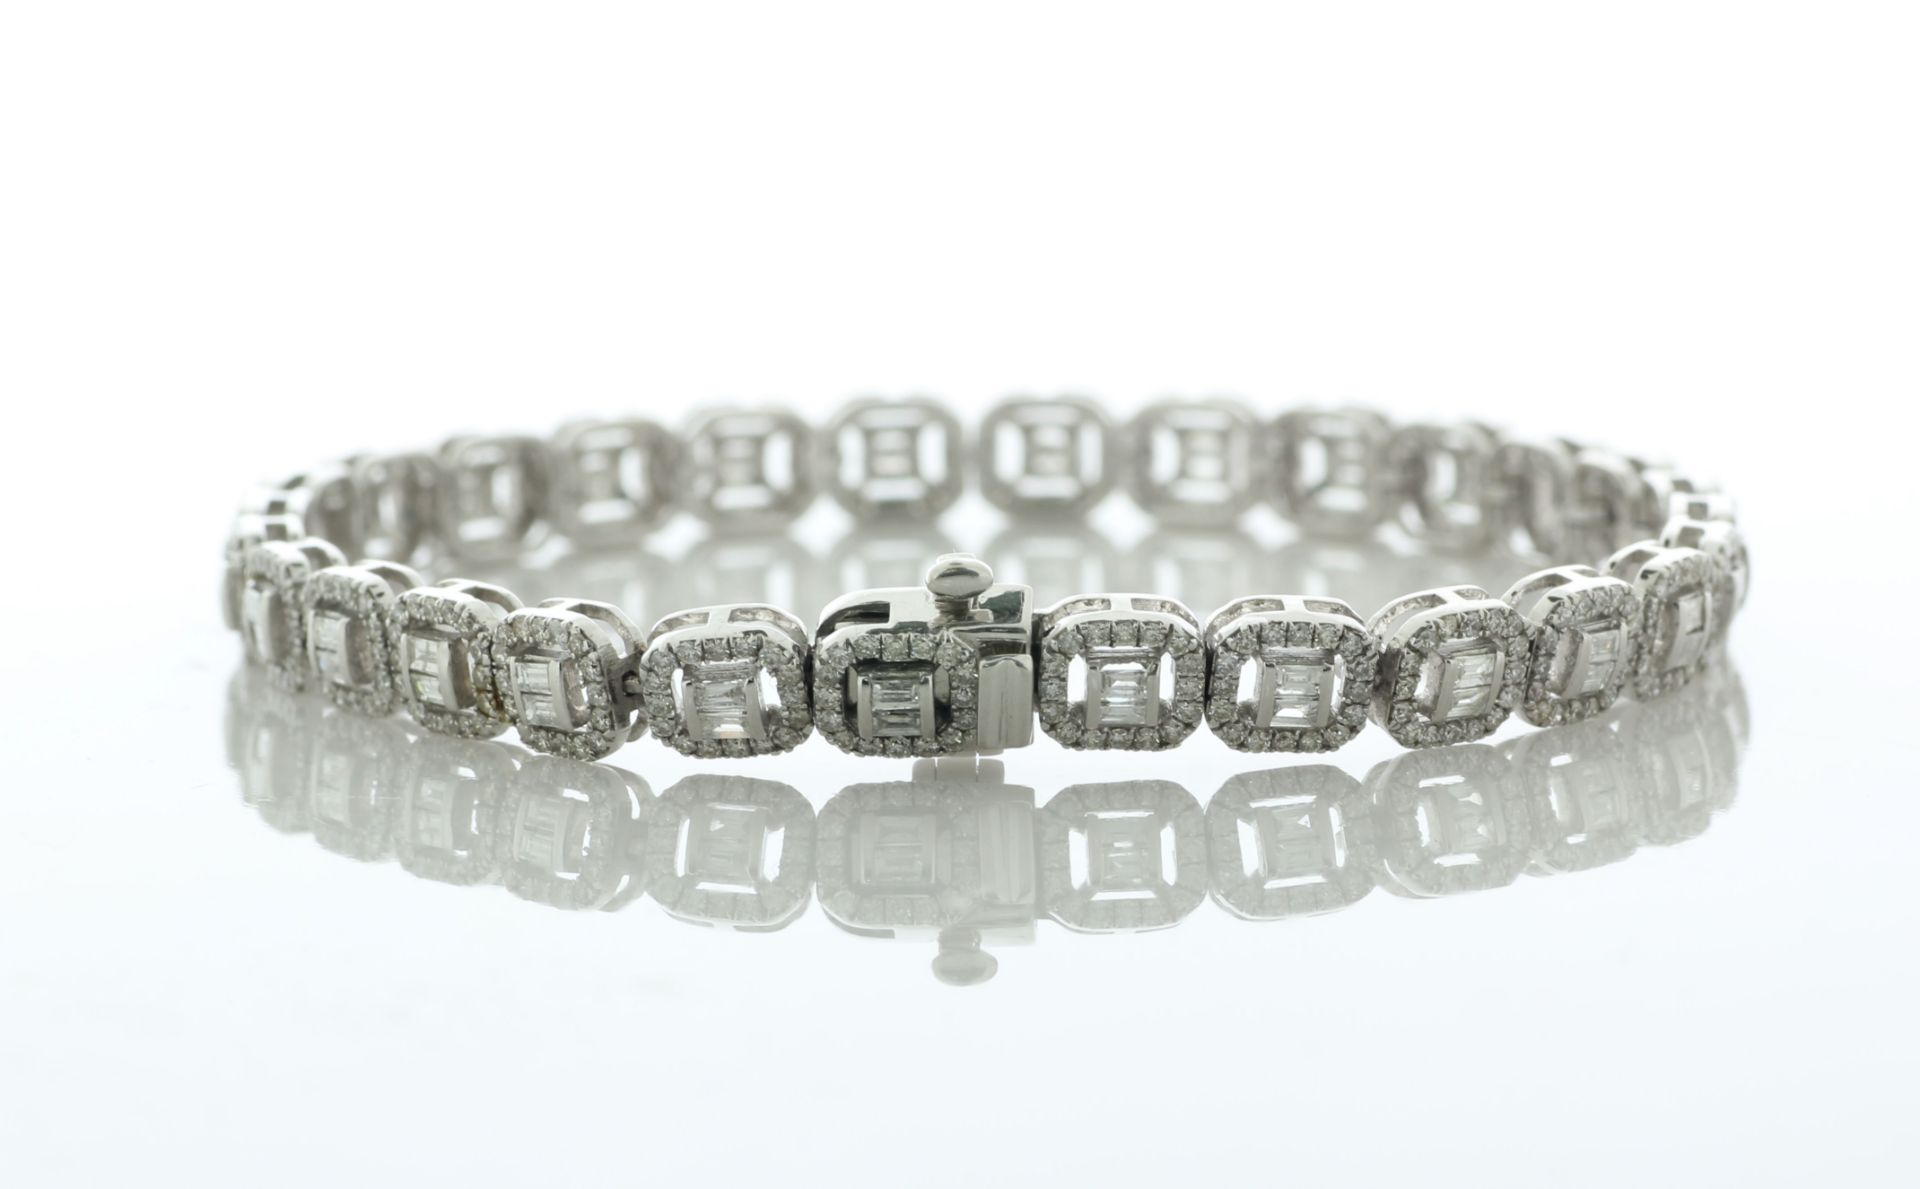 18ct White Gold Fancy Diamond Link Bracelet 4.00 Carats - Valued By AGI £9,995.00 - This stunning - Image 2 of 6